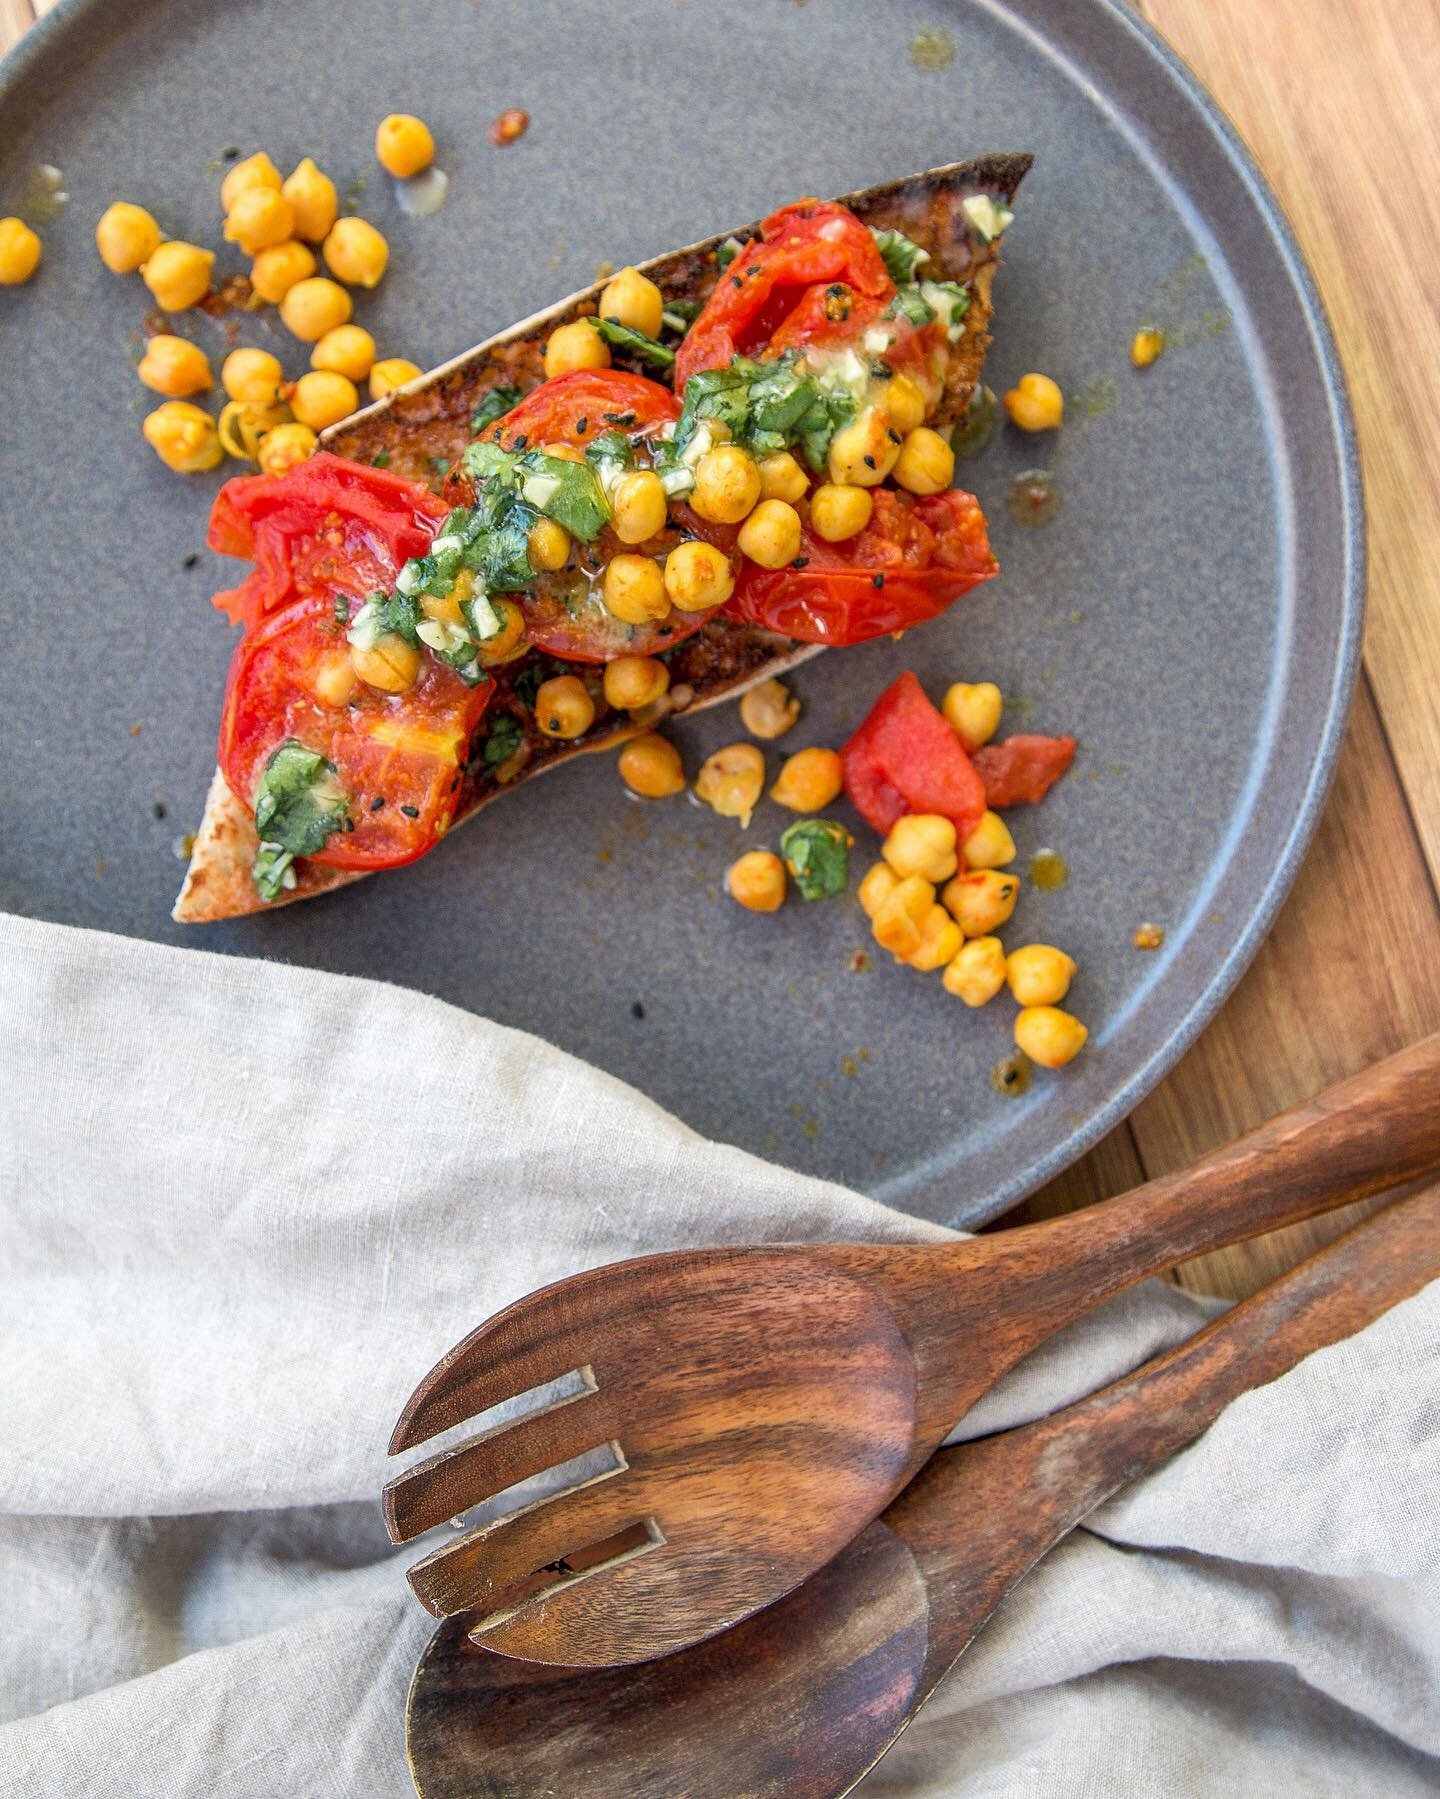 Our mouths are watering looking at @esthermclark&rsquo;s #tomsontoast recipe with roasted tomato, spiced chickpea and coriander butter. It's fresh, delicious and healthy and perfect as a light snack or quick evening meal #BTF21
 
Roasted Tomatoes &am